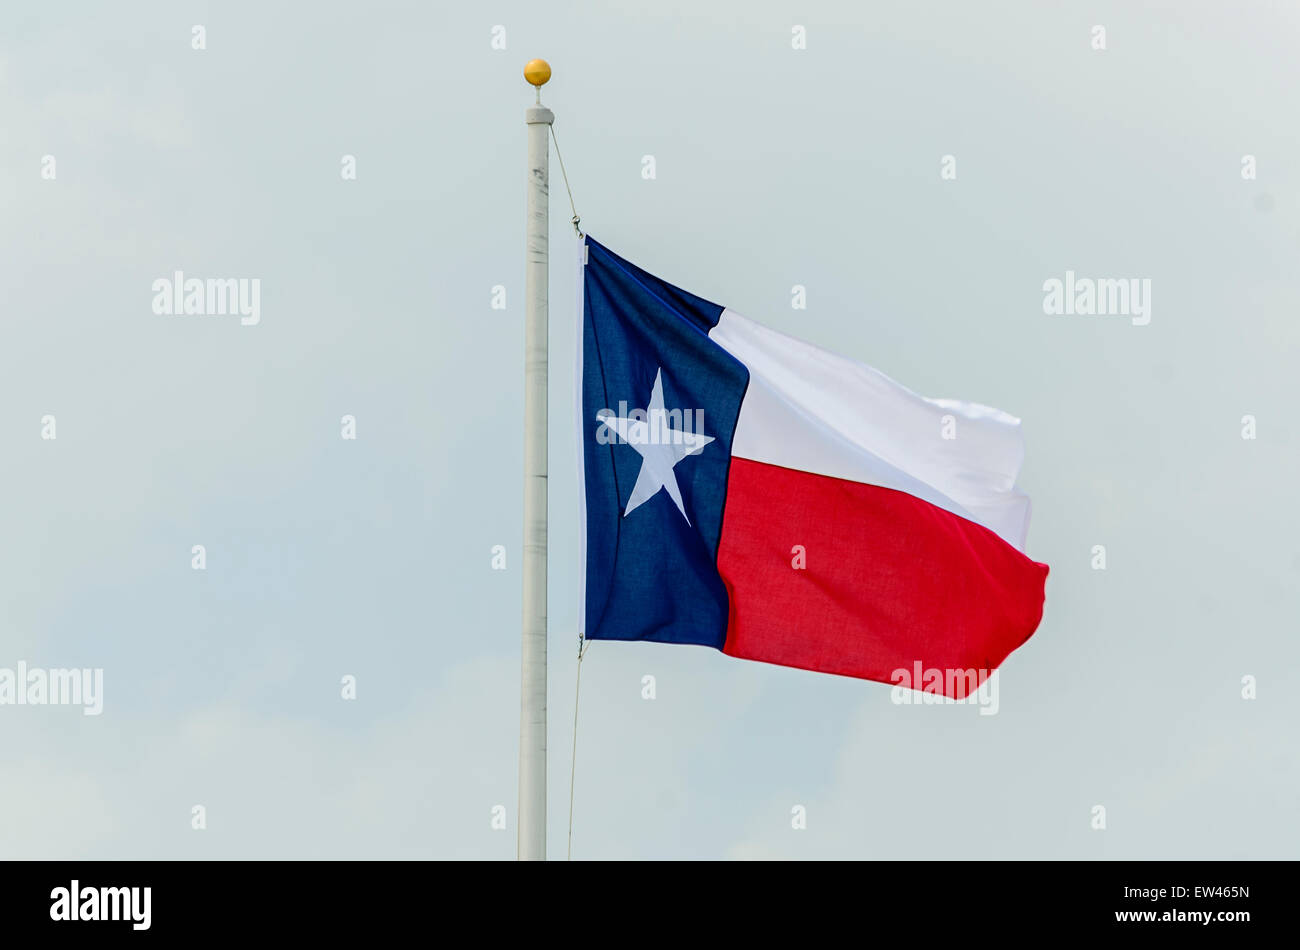 The Texas State flag flying from a flagpole against a pale blue sky. Texas, USA. Stock Photo